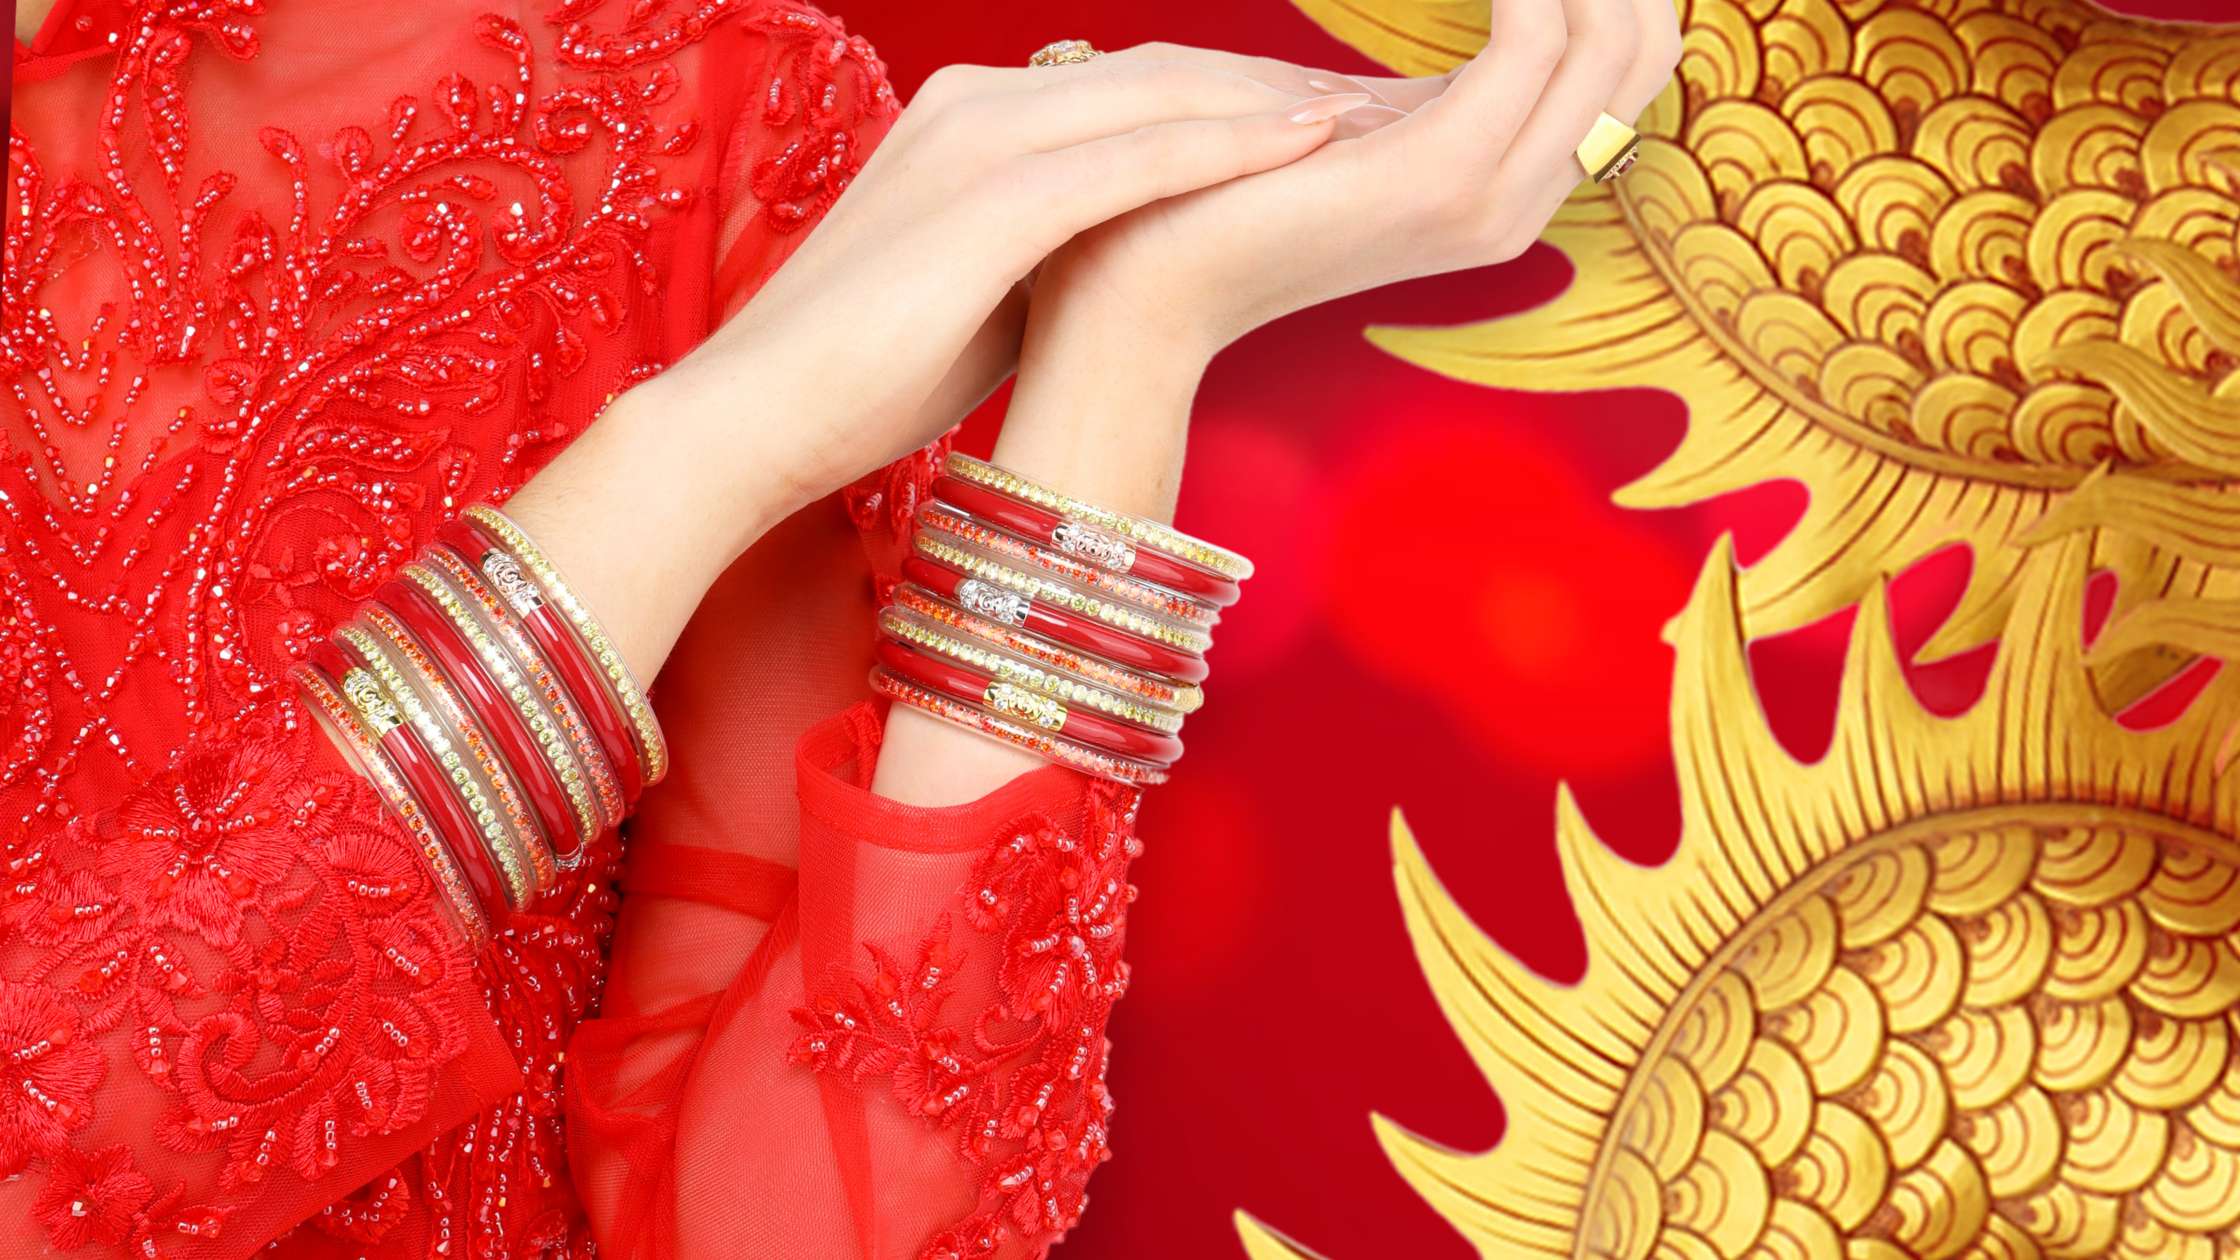 Red and Gold Year of the Dragon Bangle Bracelet Stack on Model Wearing Red Dress for Lunar New Year | BuDhaGirl